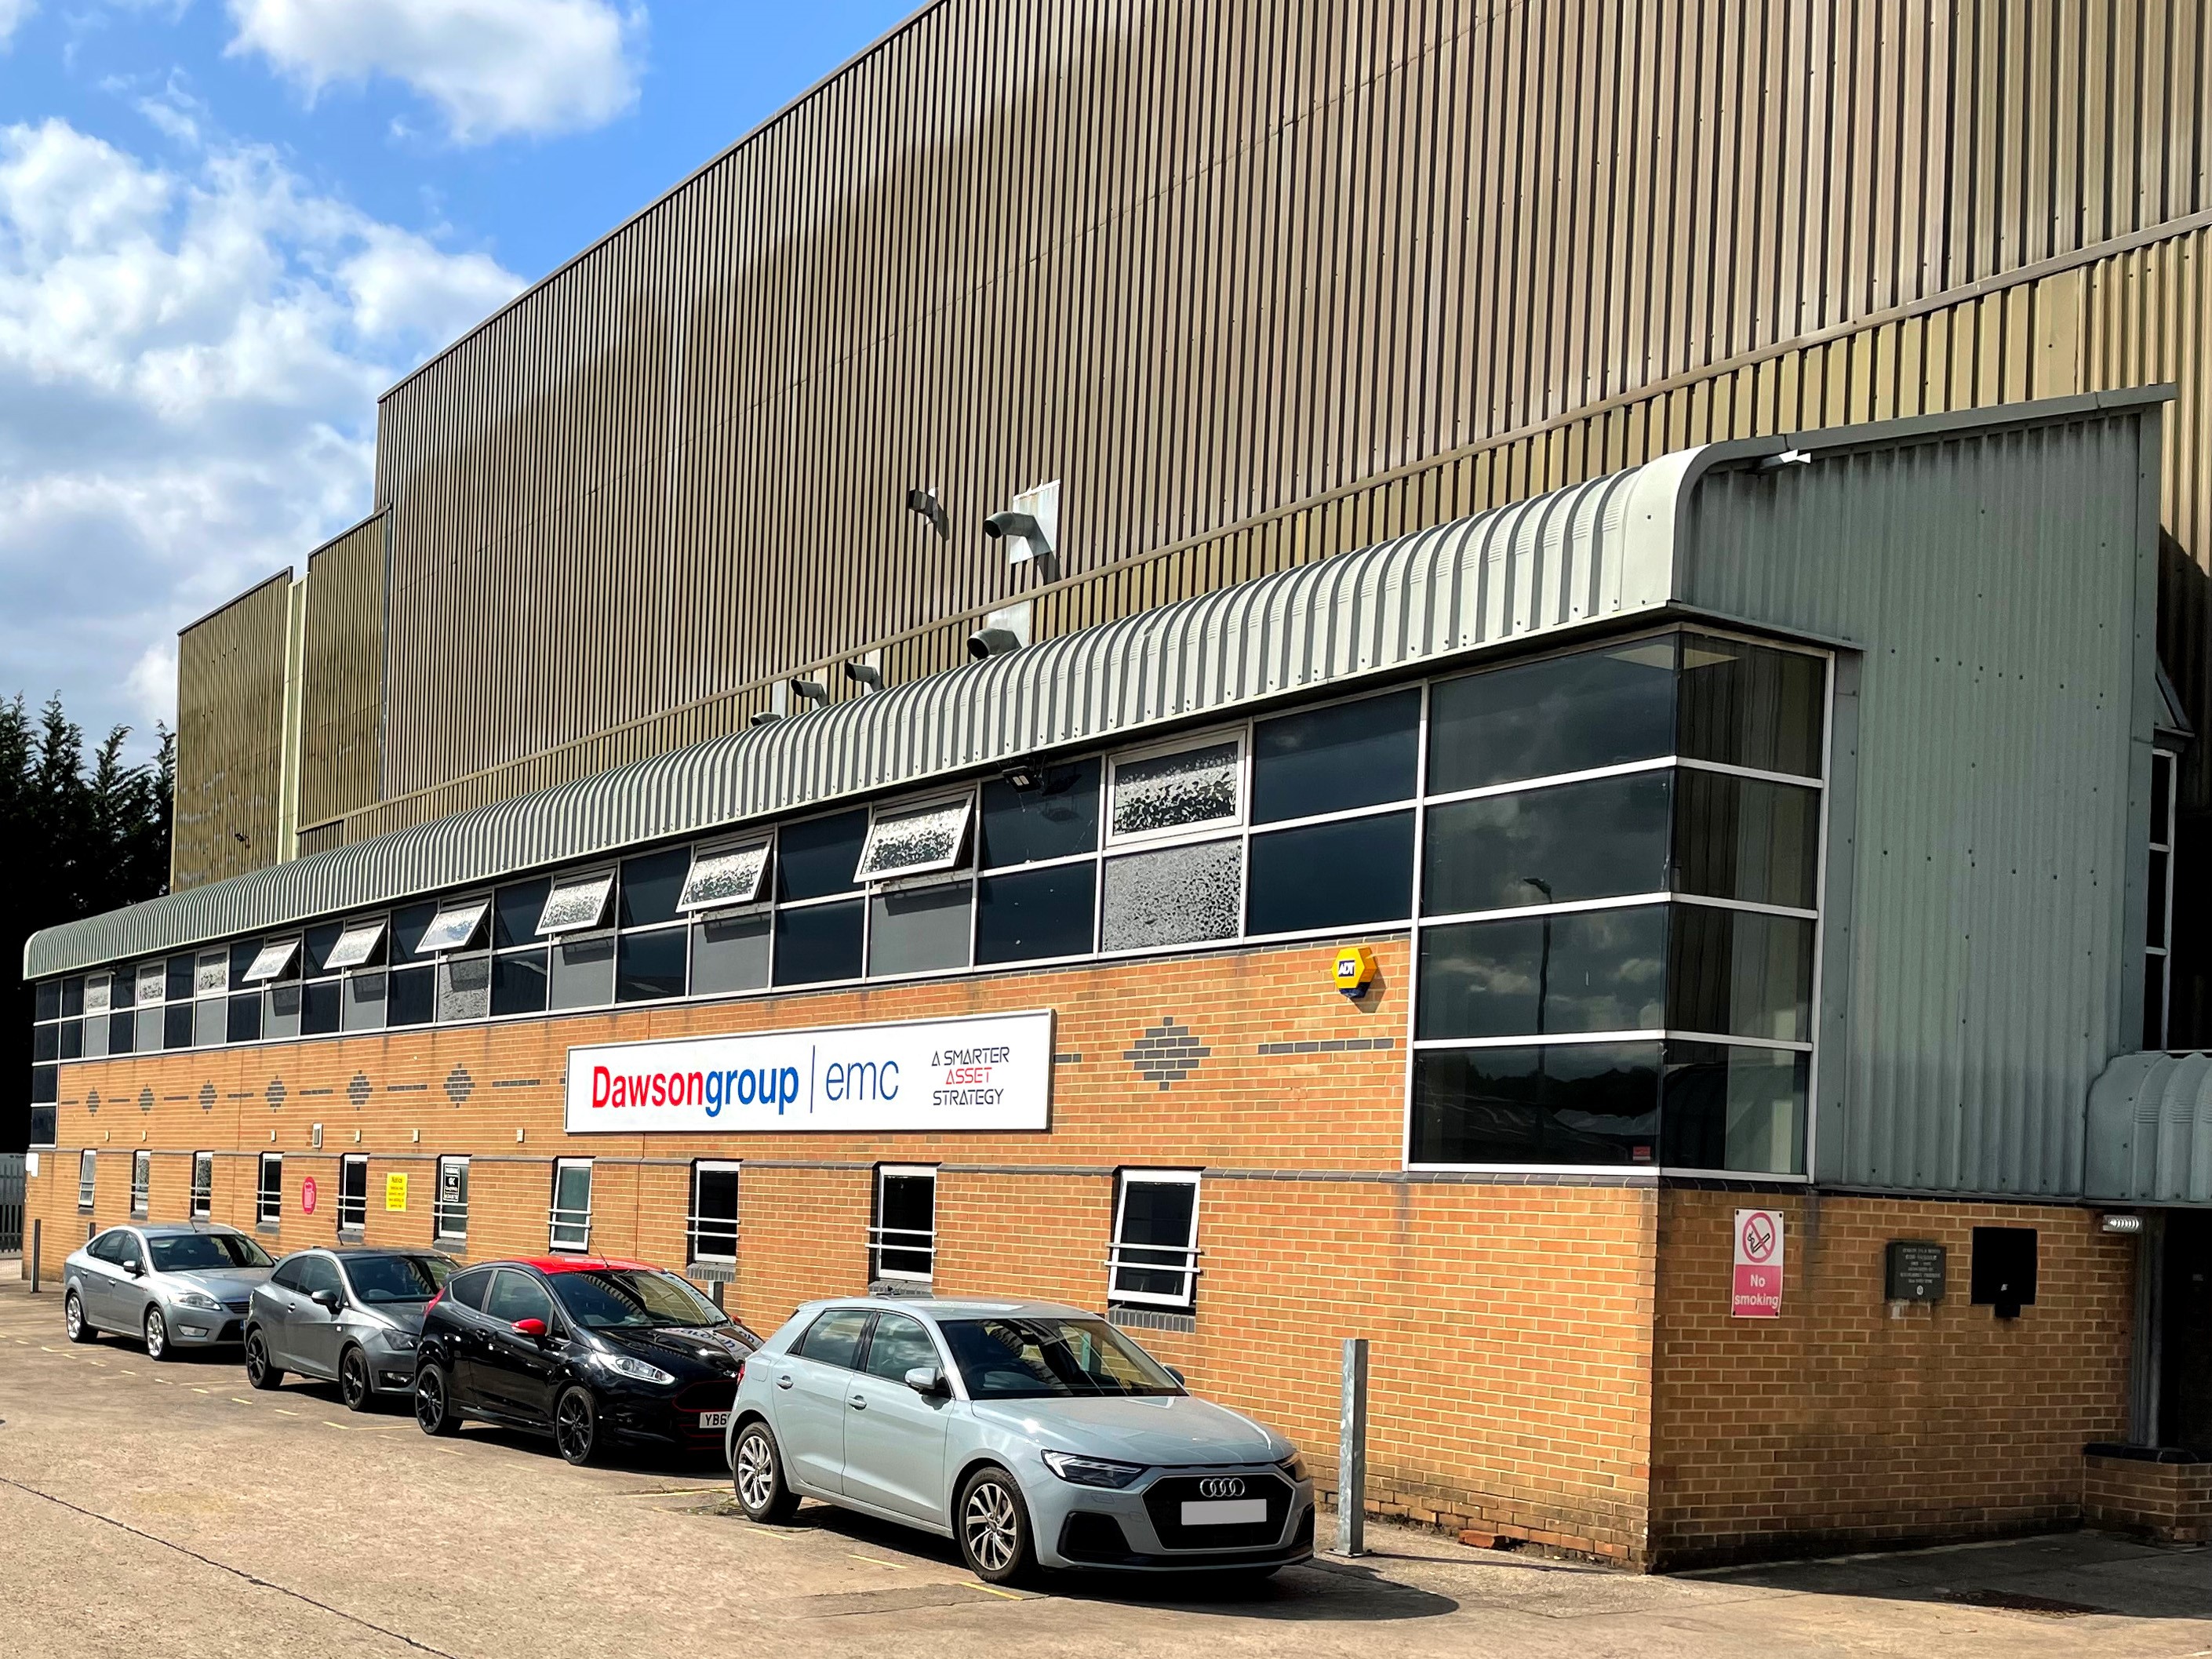 New Brighouse site for Dawsongroup emc